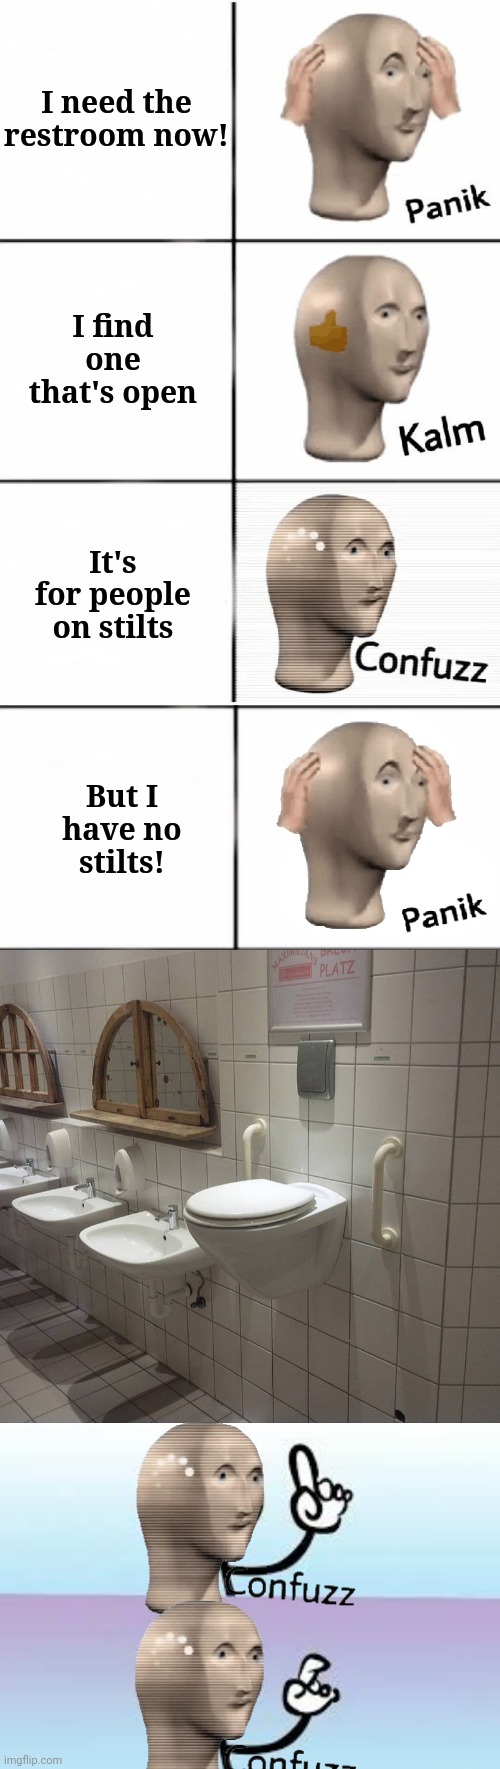  I need the
restroom now! I find one that's open; It's for people on stilts; But I have no stilts! | image tagged in panik kalm confuzz,public restrooms | made w/ Imgflip meme maker